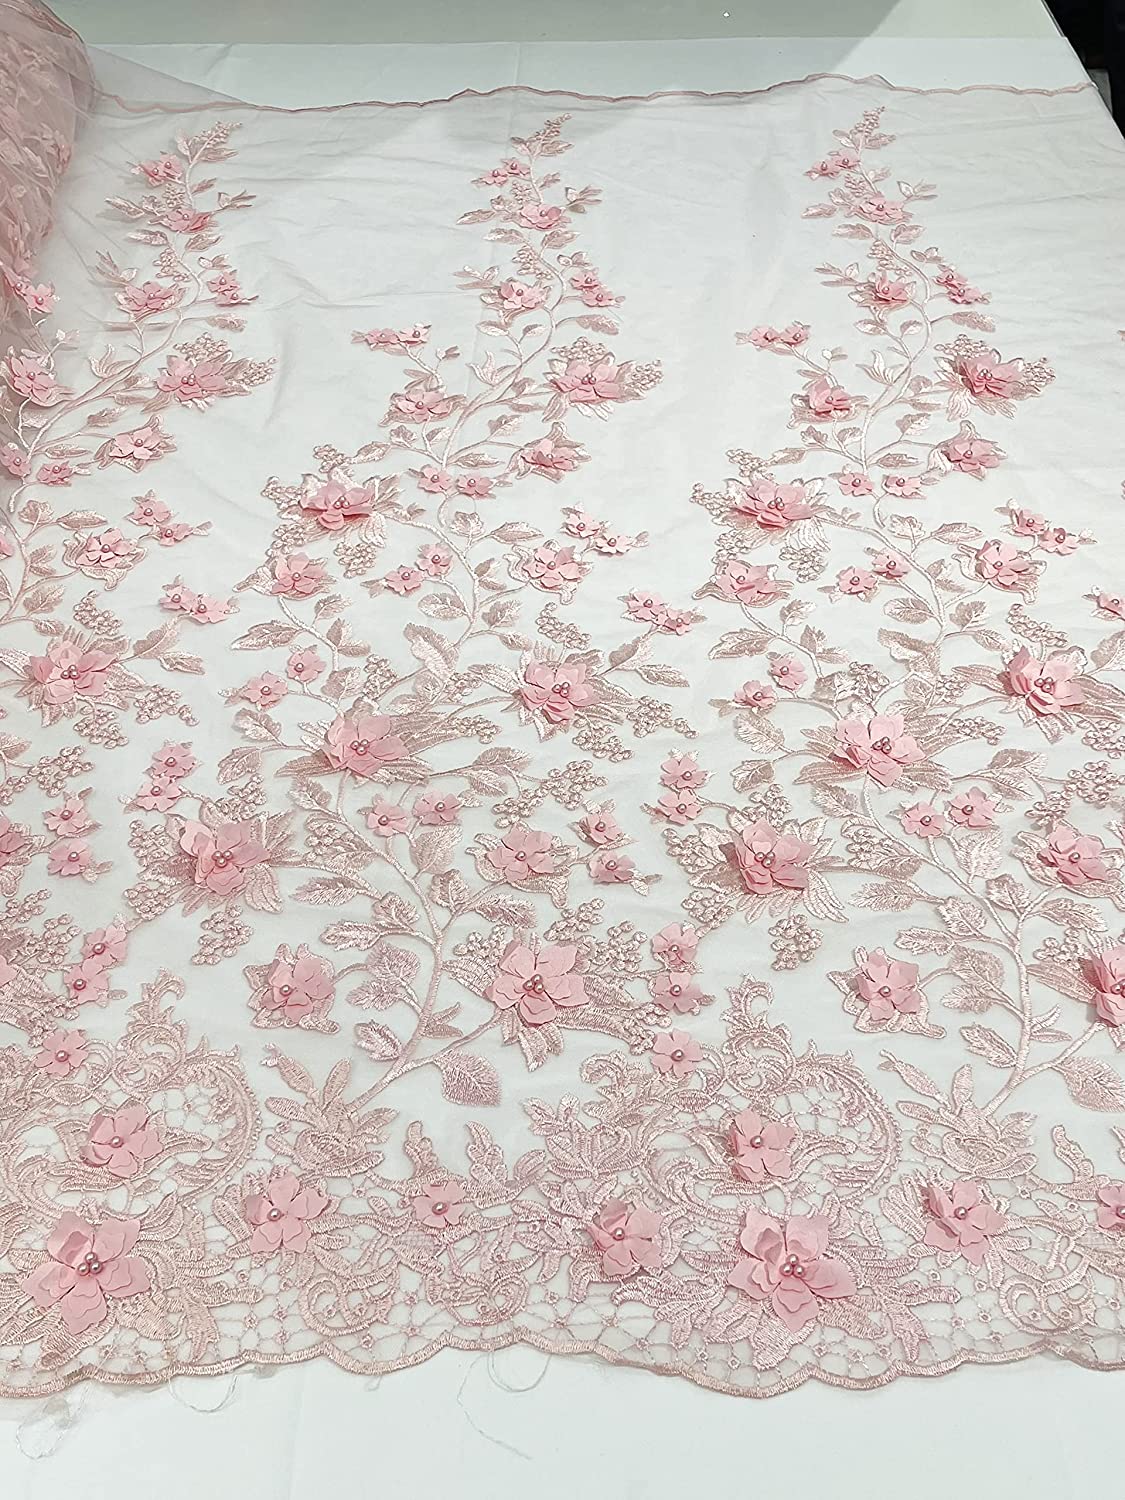 Emily 3-D Floral Design Embroider with Pearls On A Mesh Lace Fabric (1 Yard, Pink)